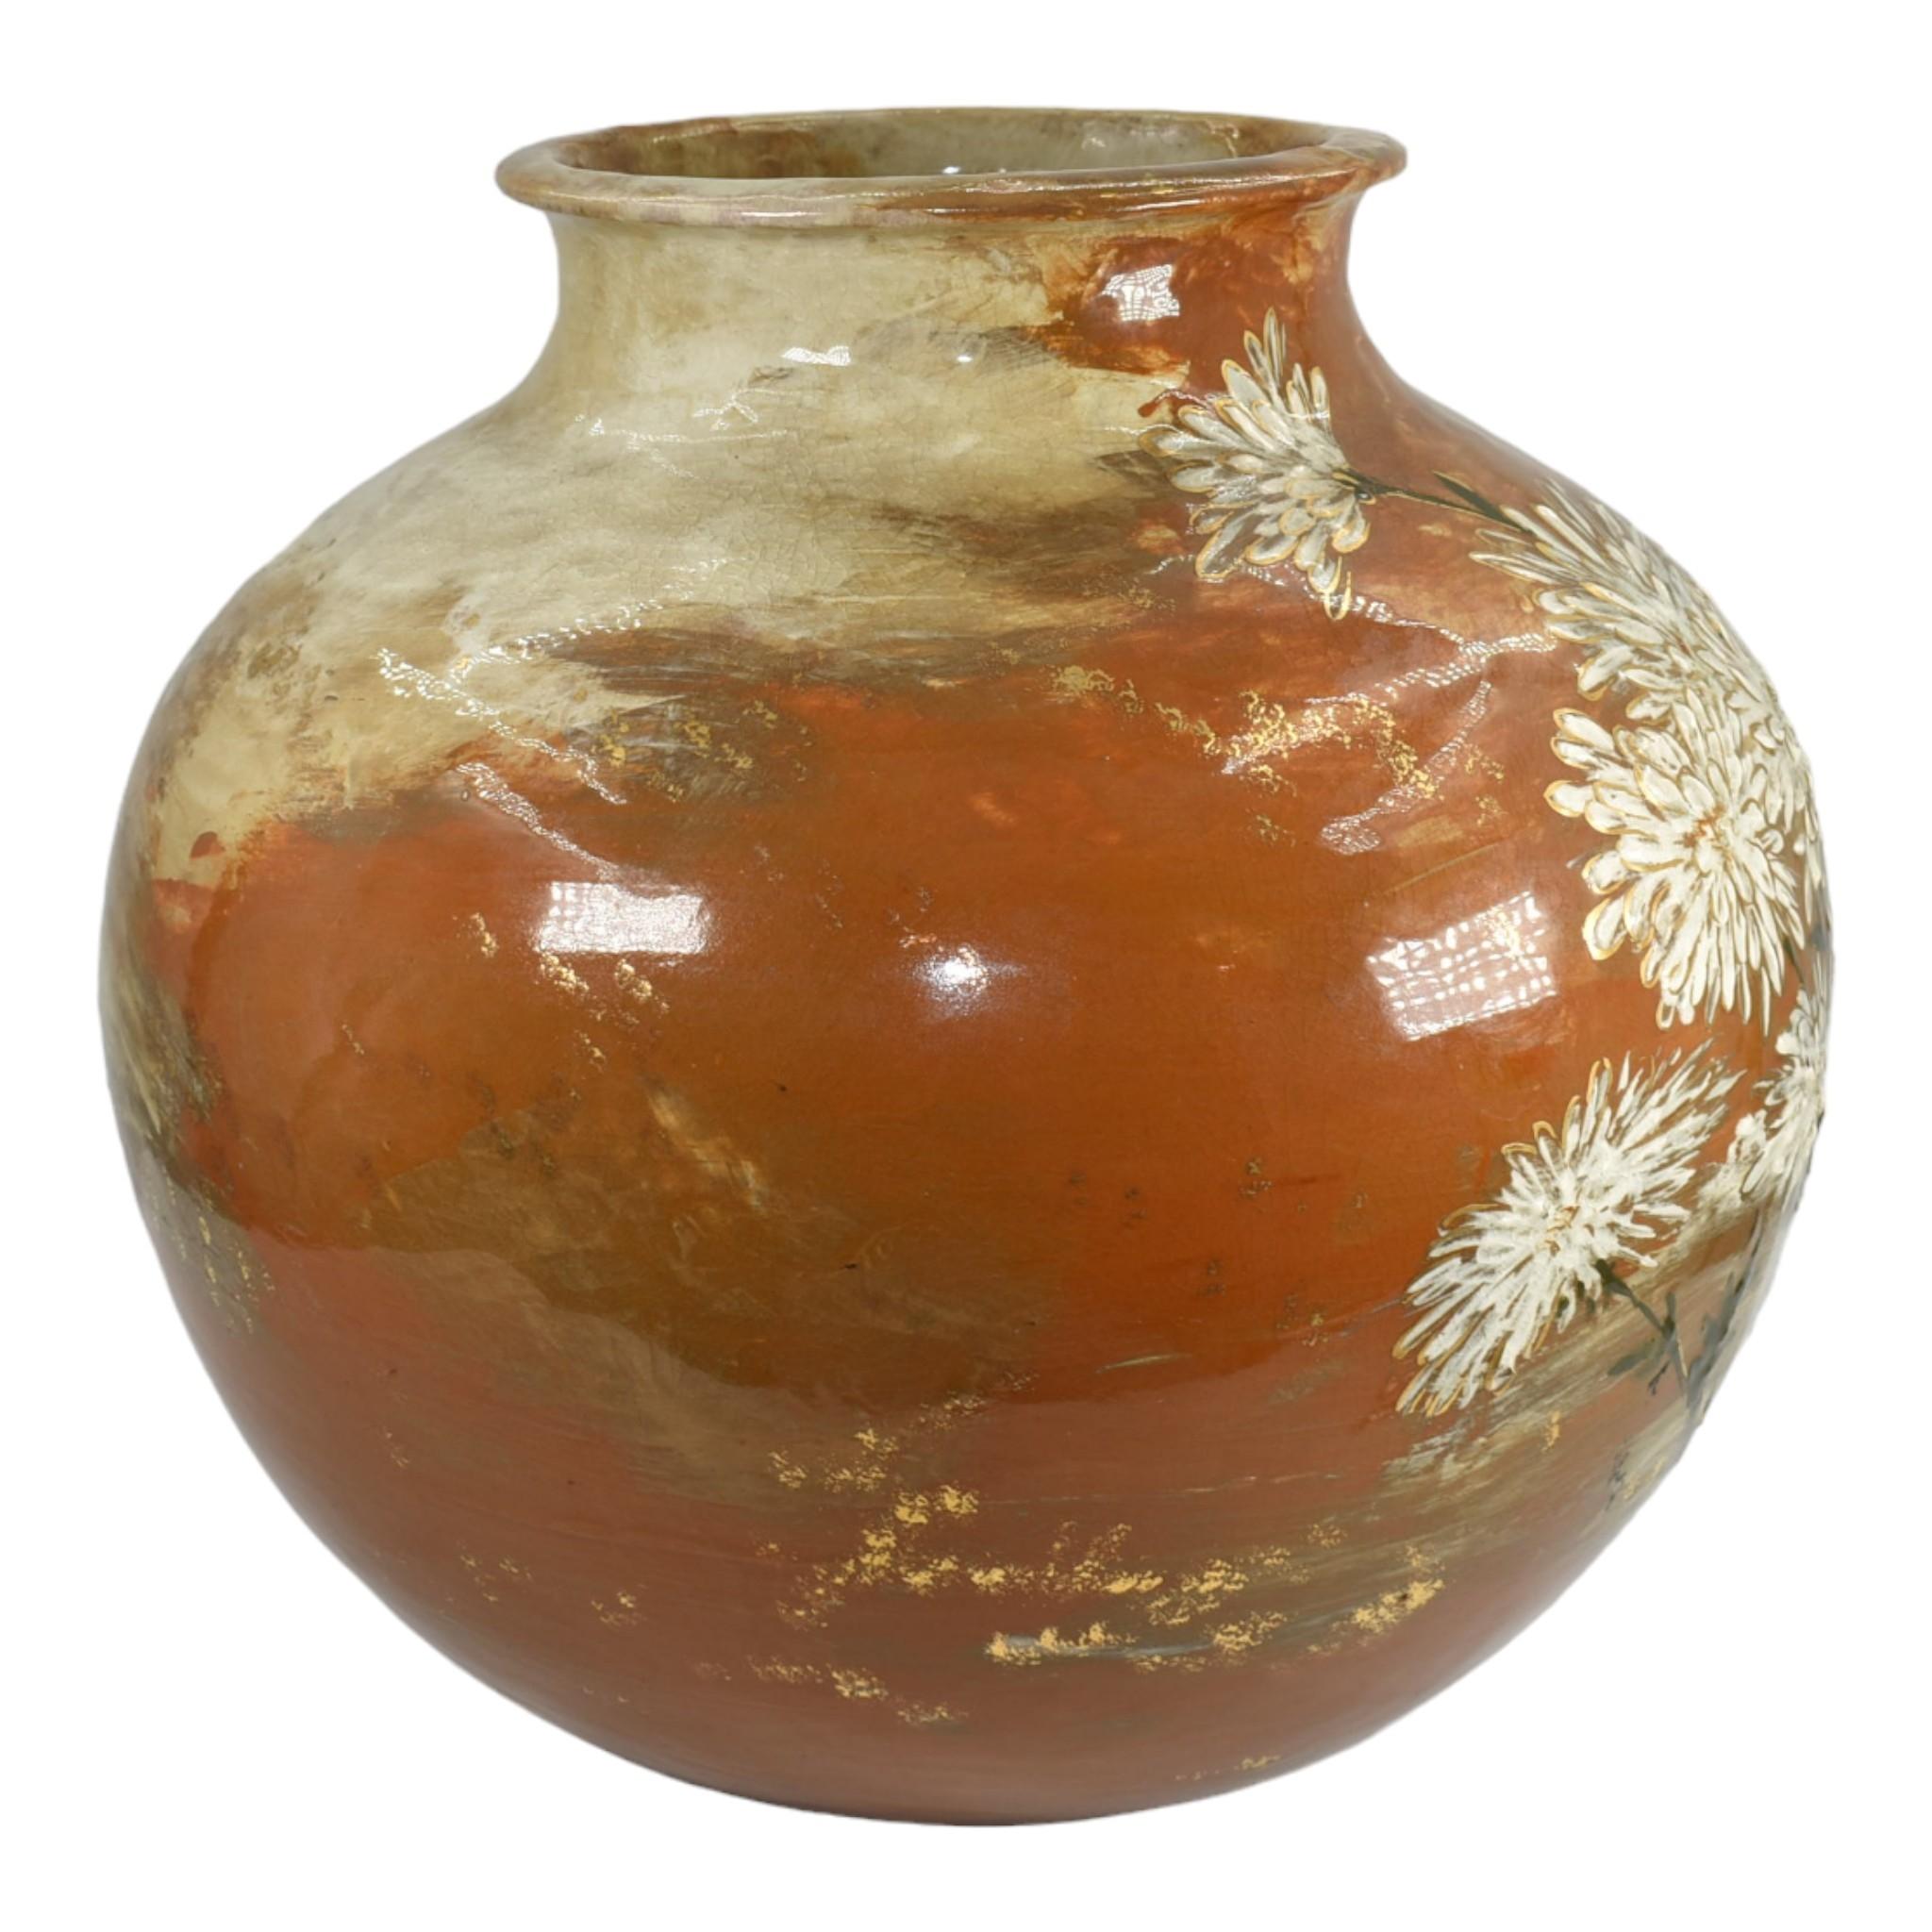 Rookwood 1833 Vintage Pottery Limoges Orange Chrysanthemum Jardiniere Fry In Good Condition For Sale In East Peoria, IL